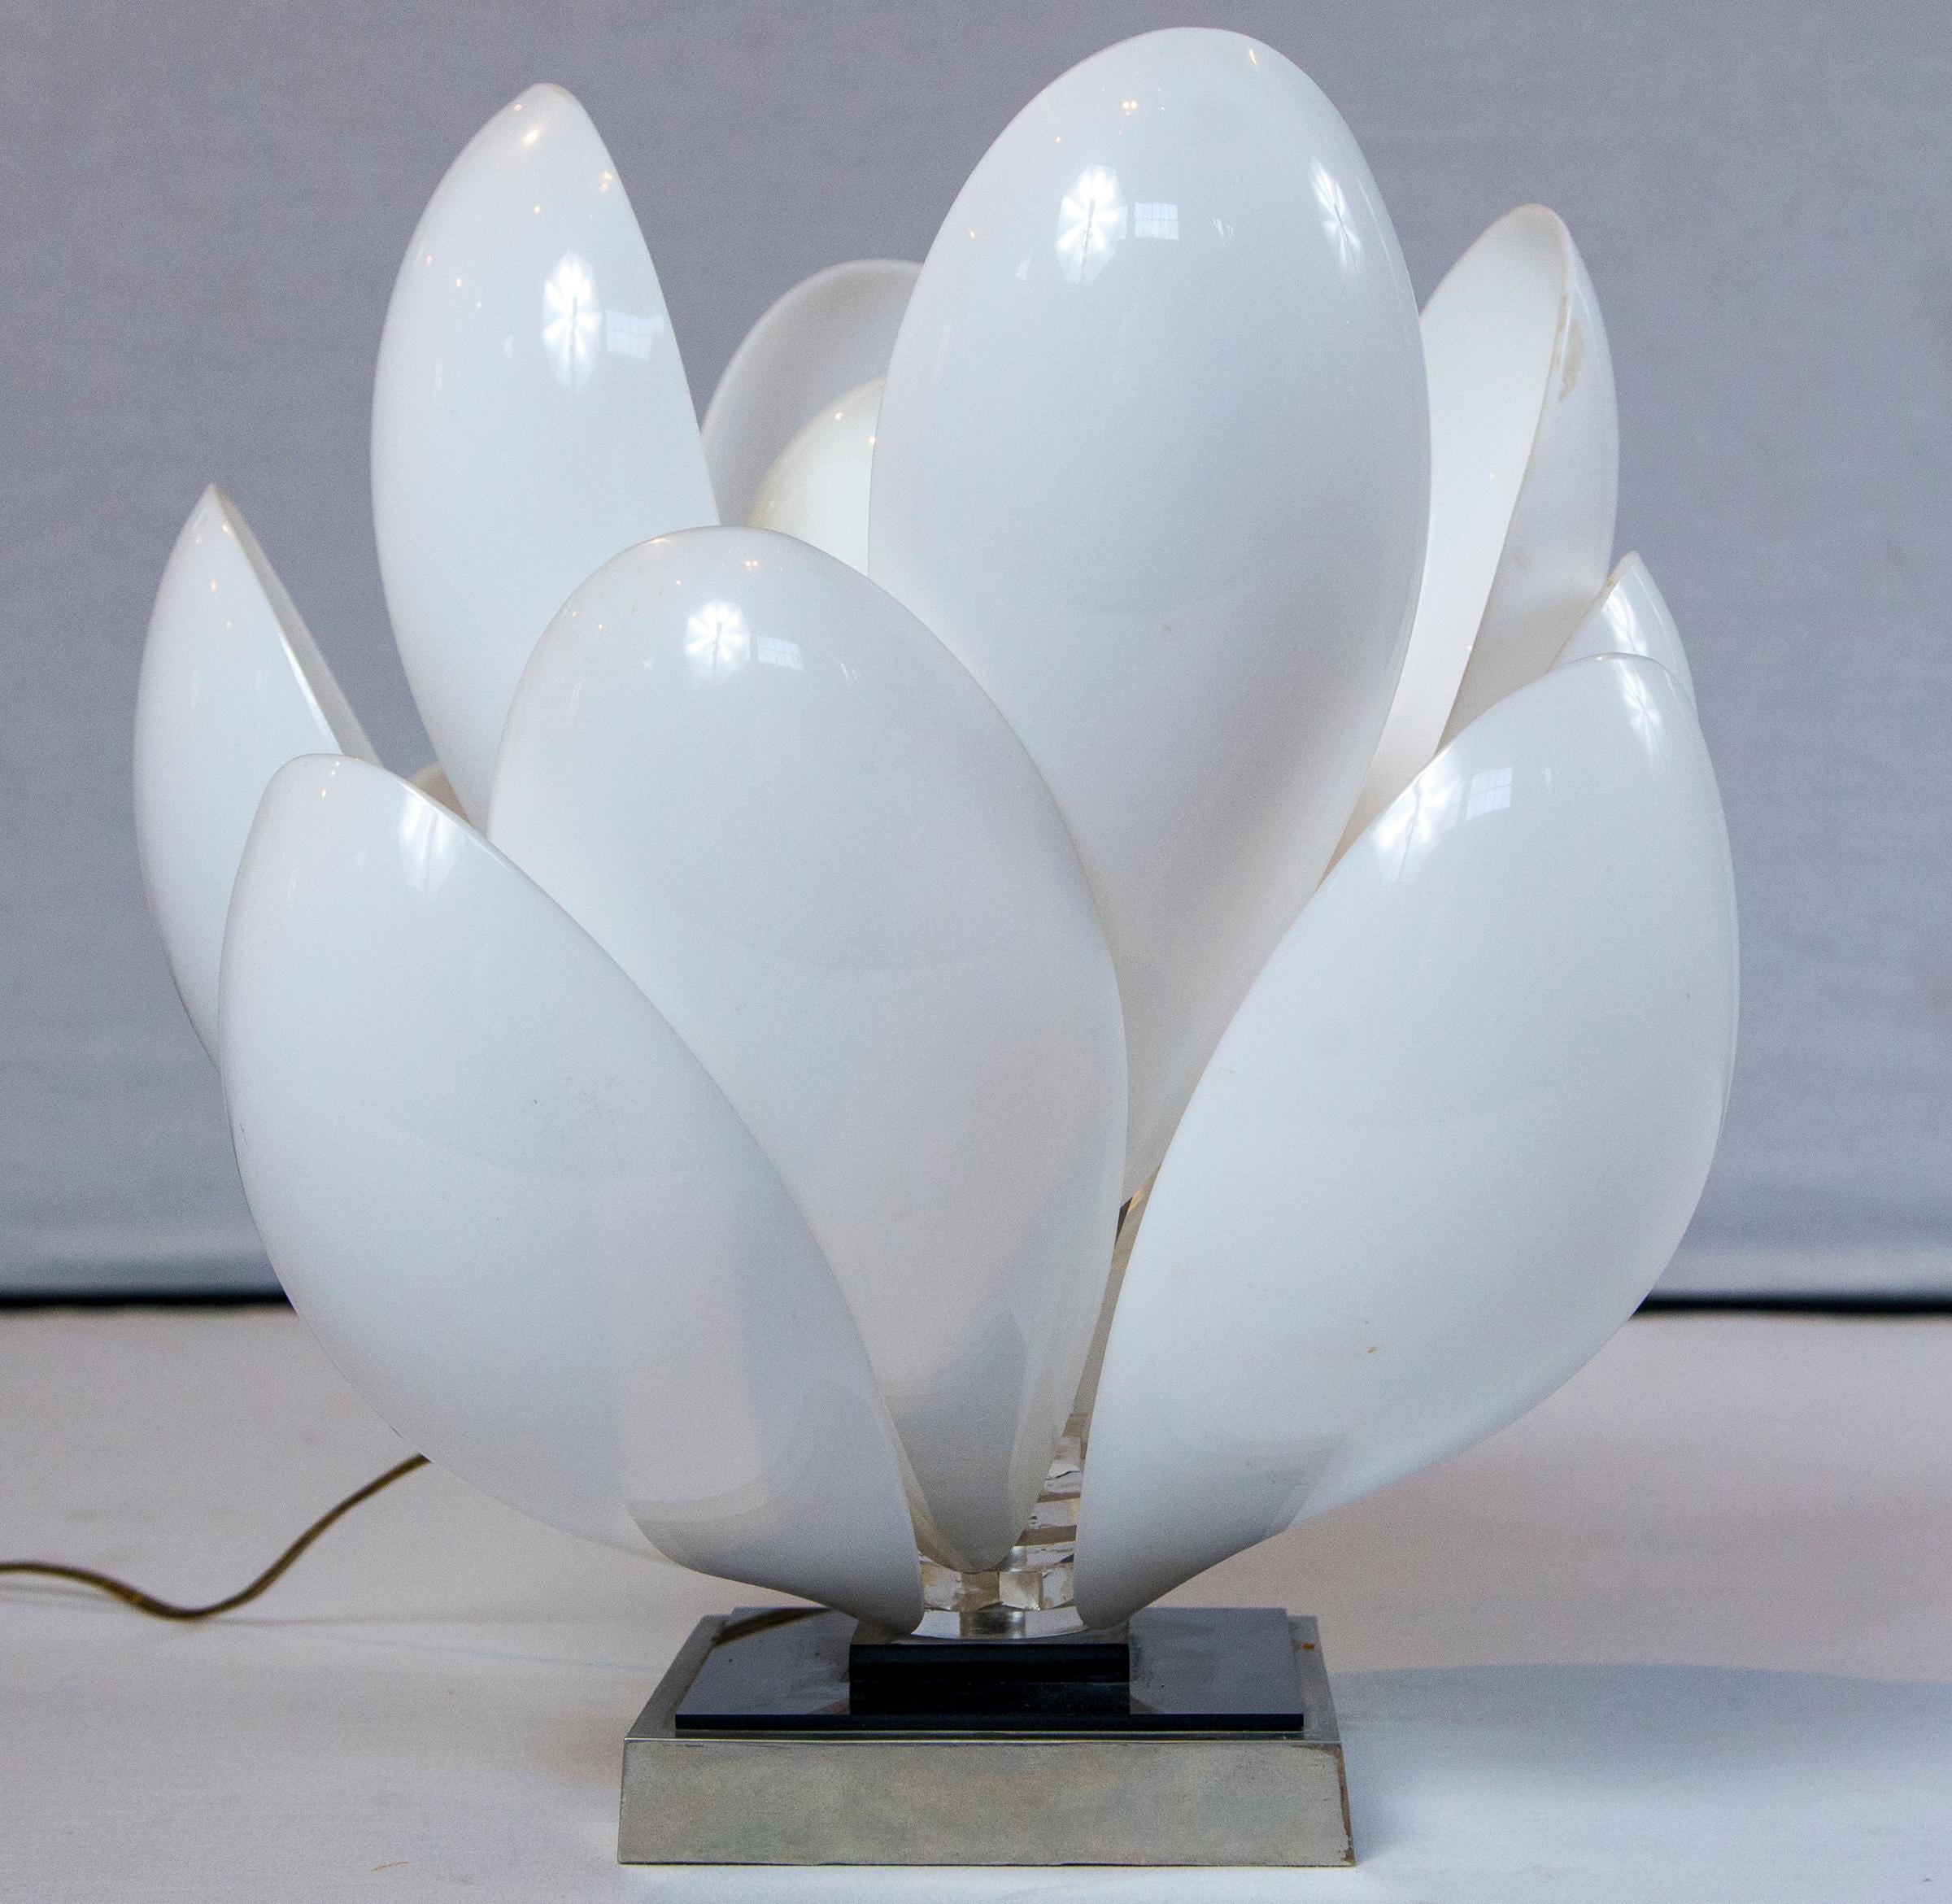 Roger Rougier Lucite lotus table lamp. A multiple Lucite leaf lotus flower with a center light bulb socket form this table lamp.